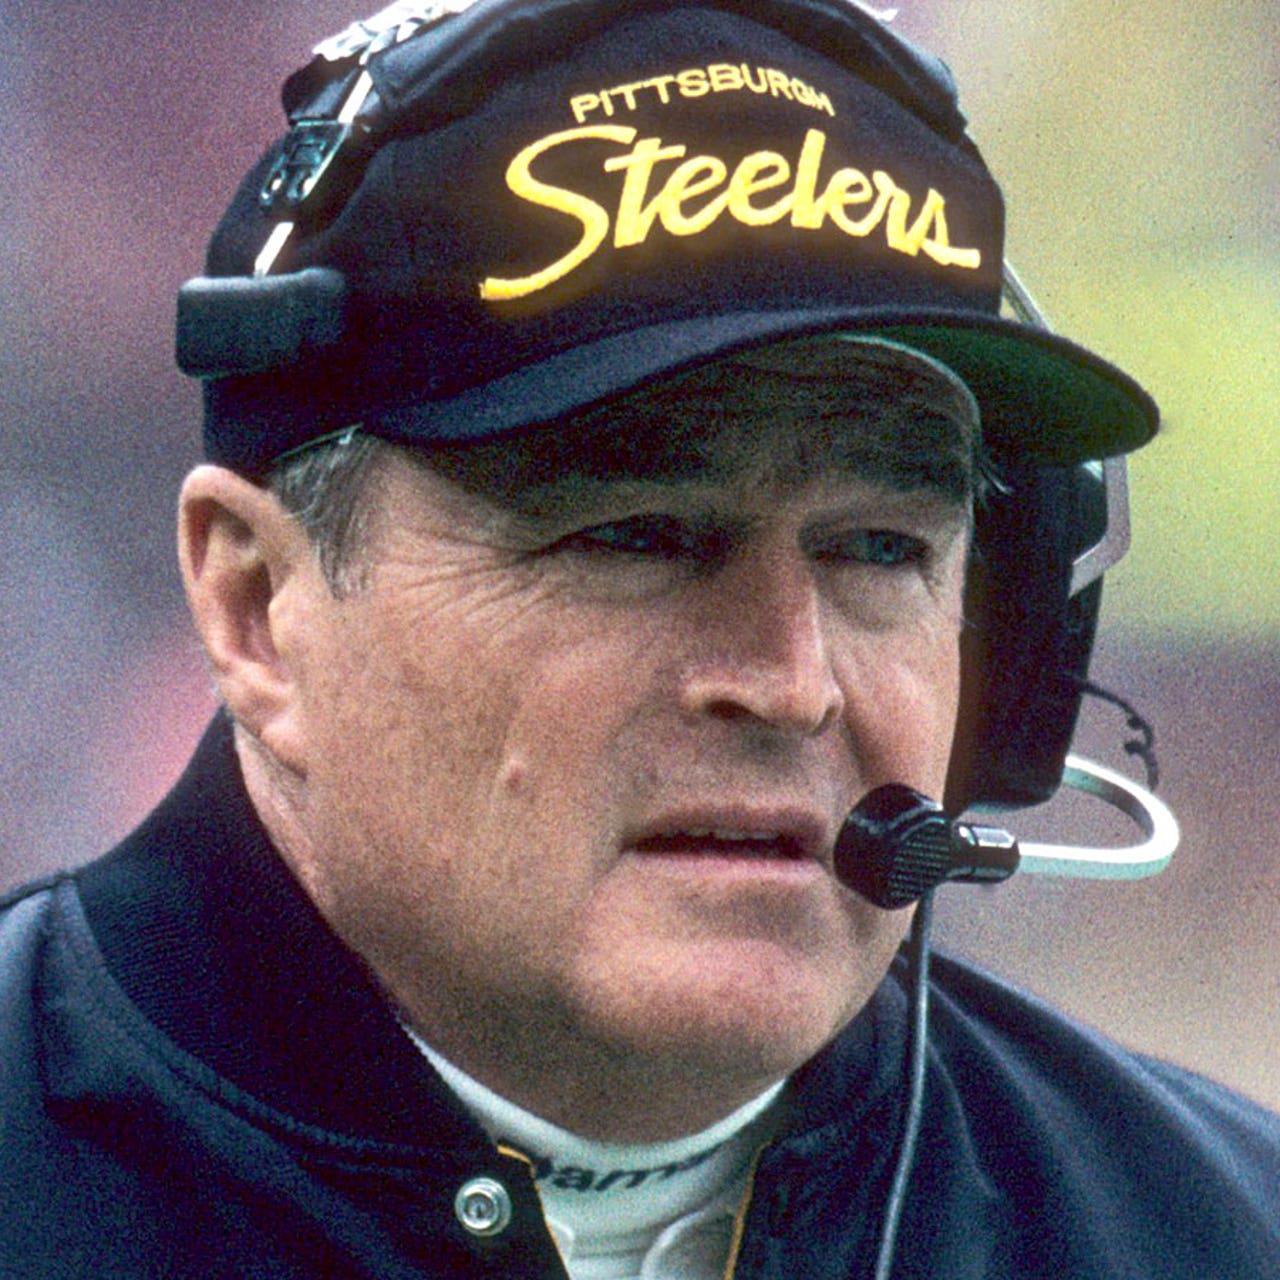 Hall of Fame Steelers coach Chuck Noll dead at 82 | FOX Sports